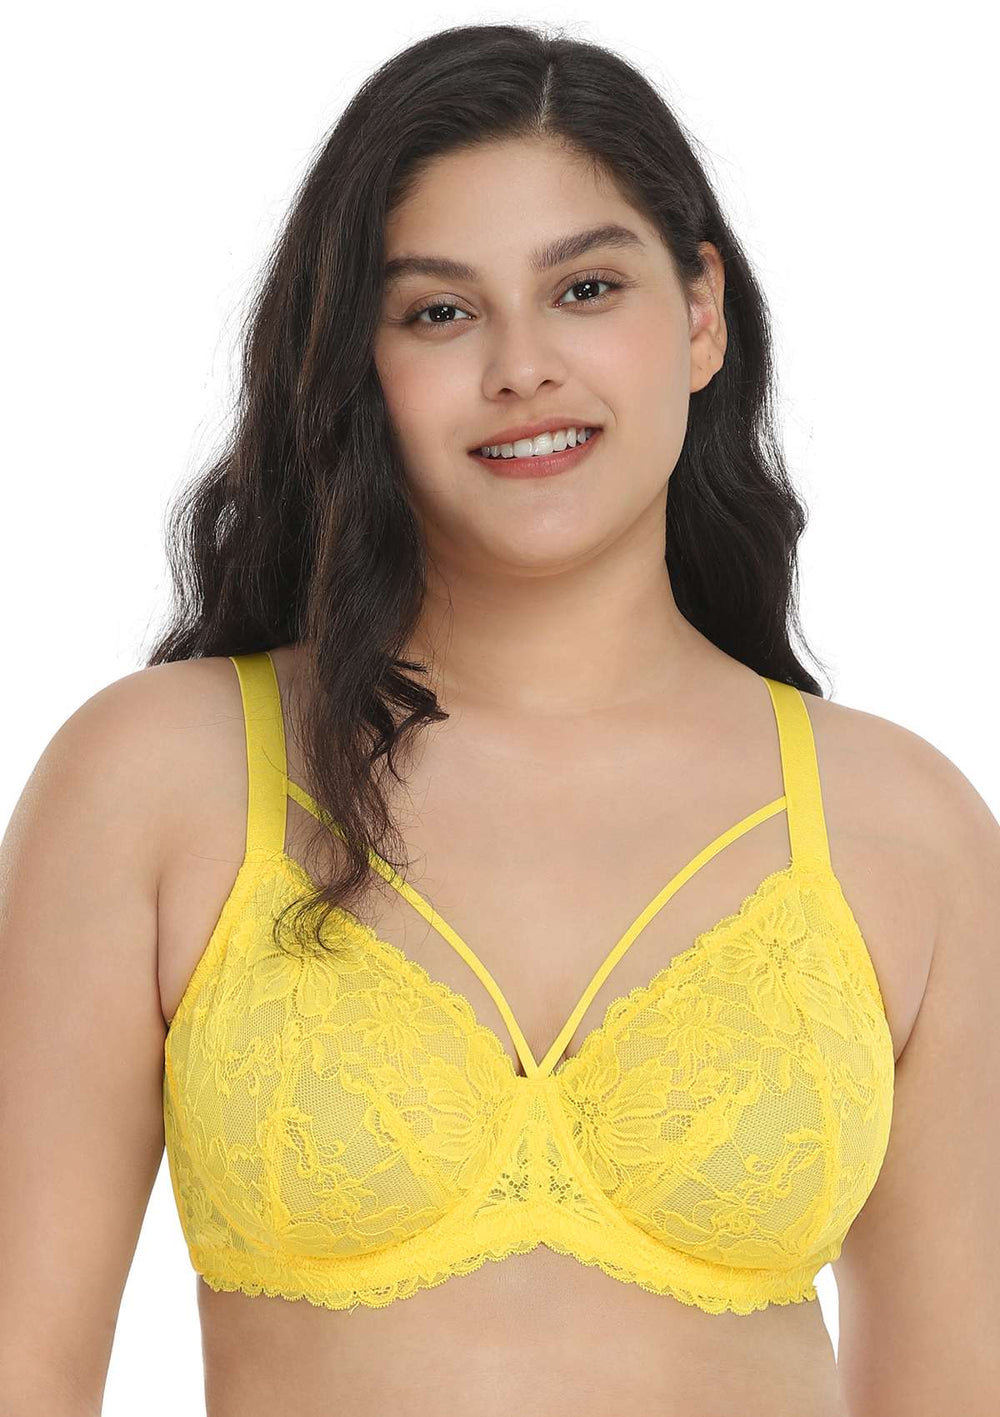 HSIA Pretty In Petals Unlined Lace Bra: Comfortable and Supportive